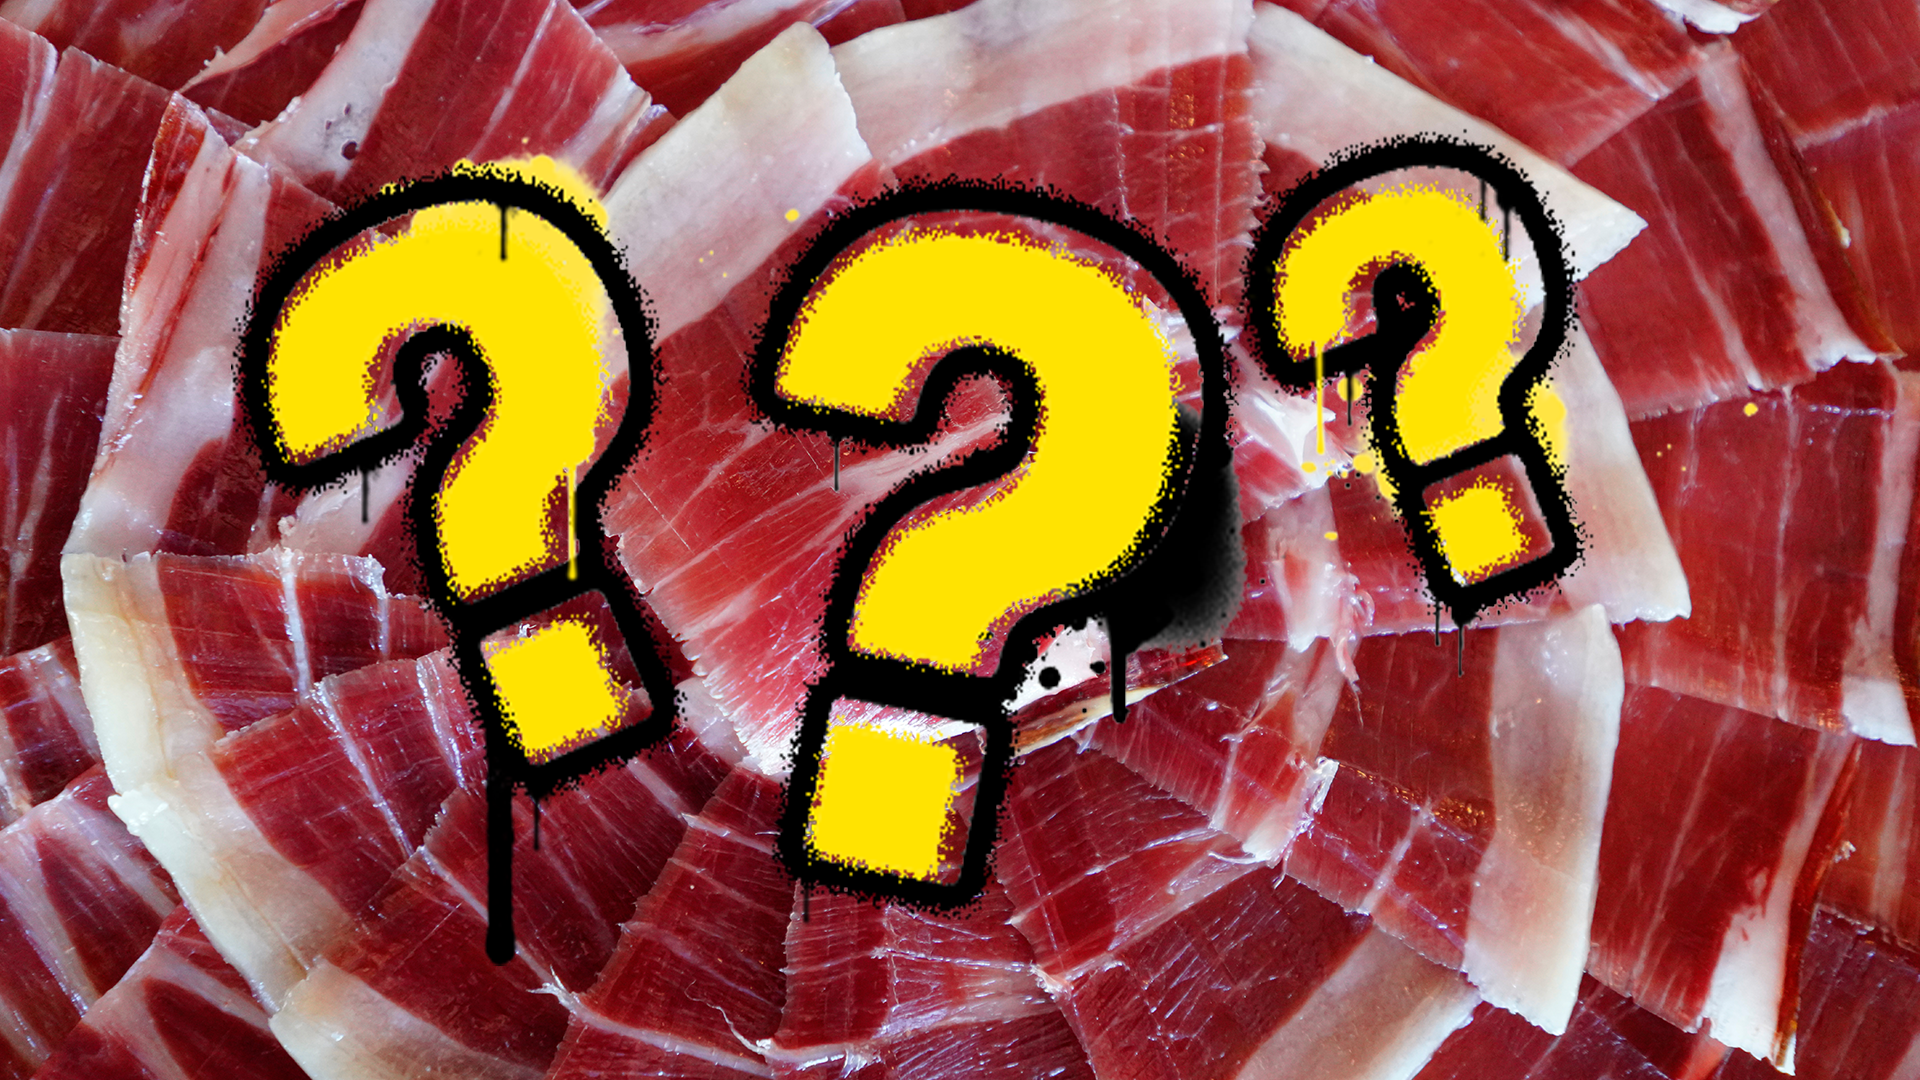 Ham and question marks